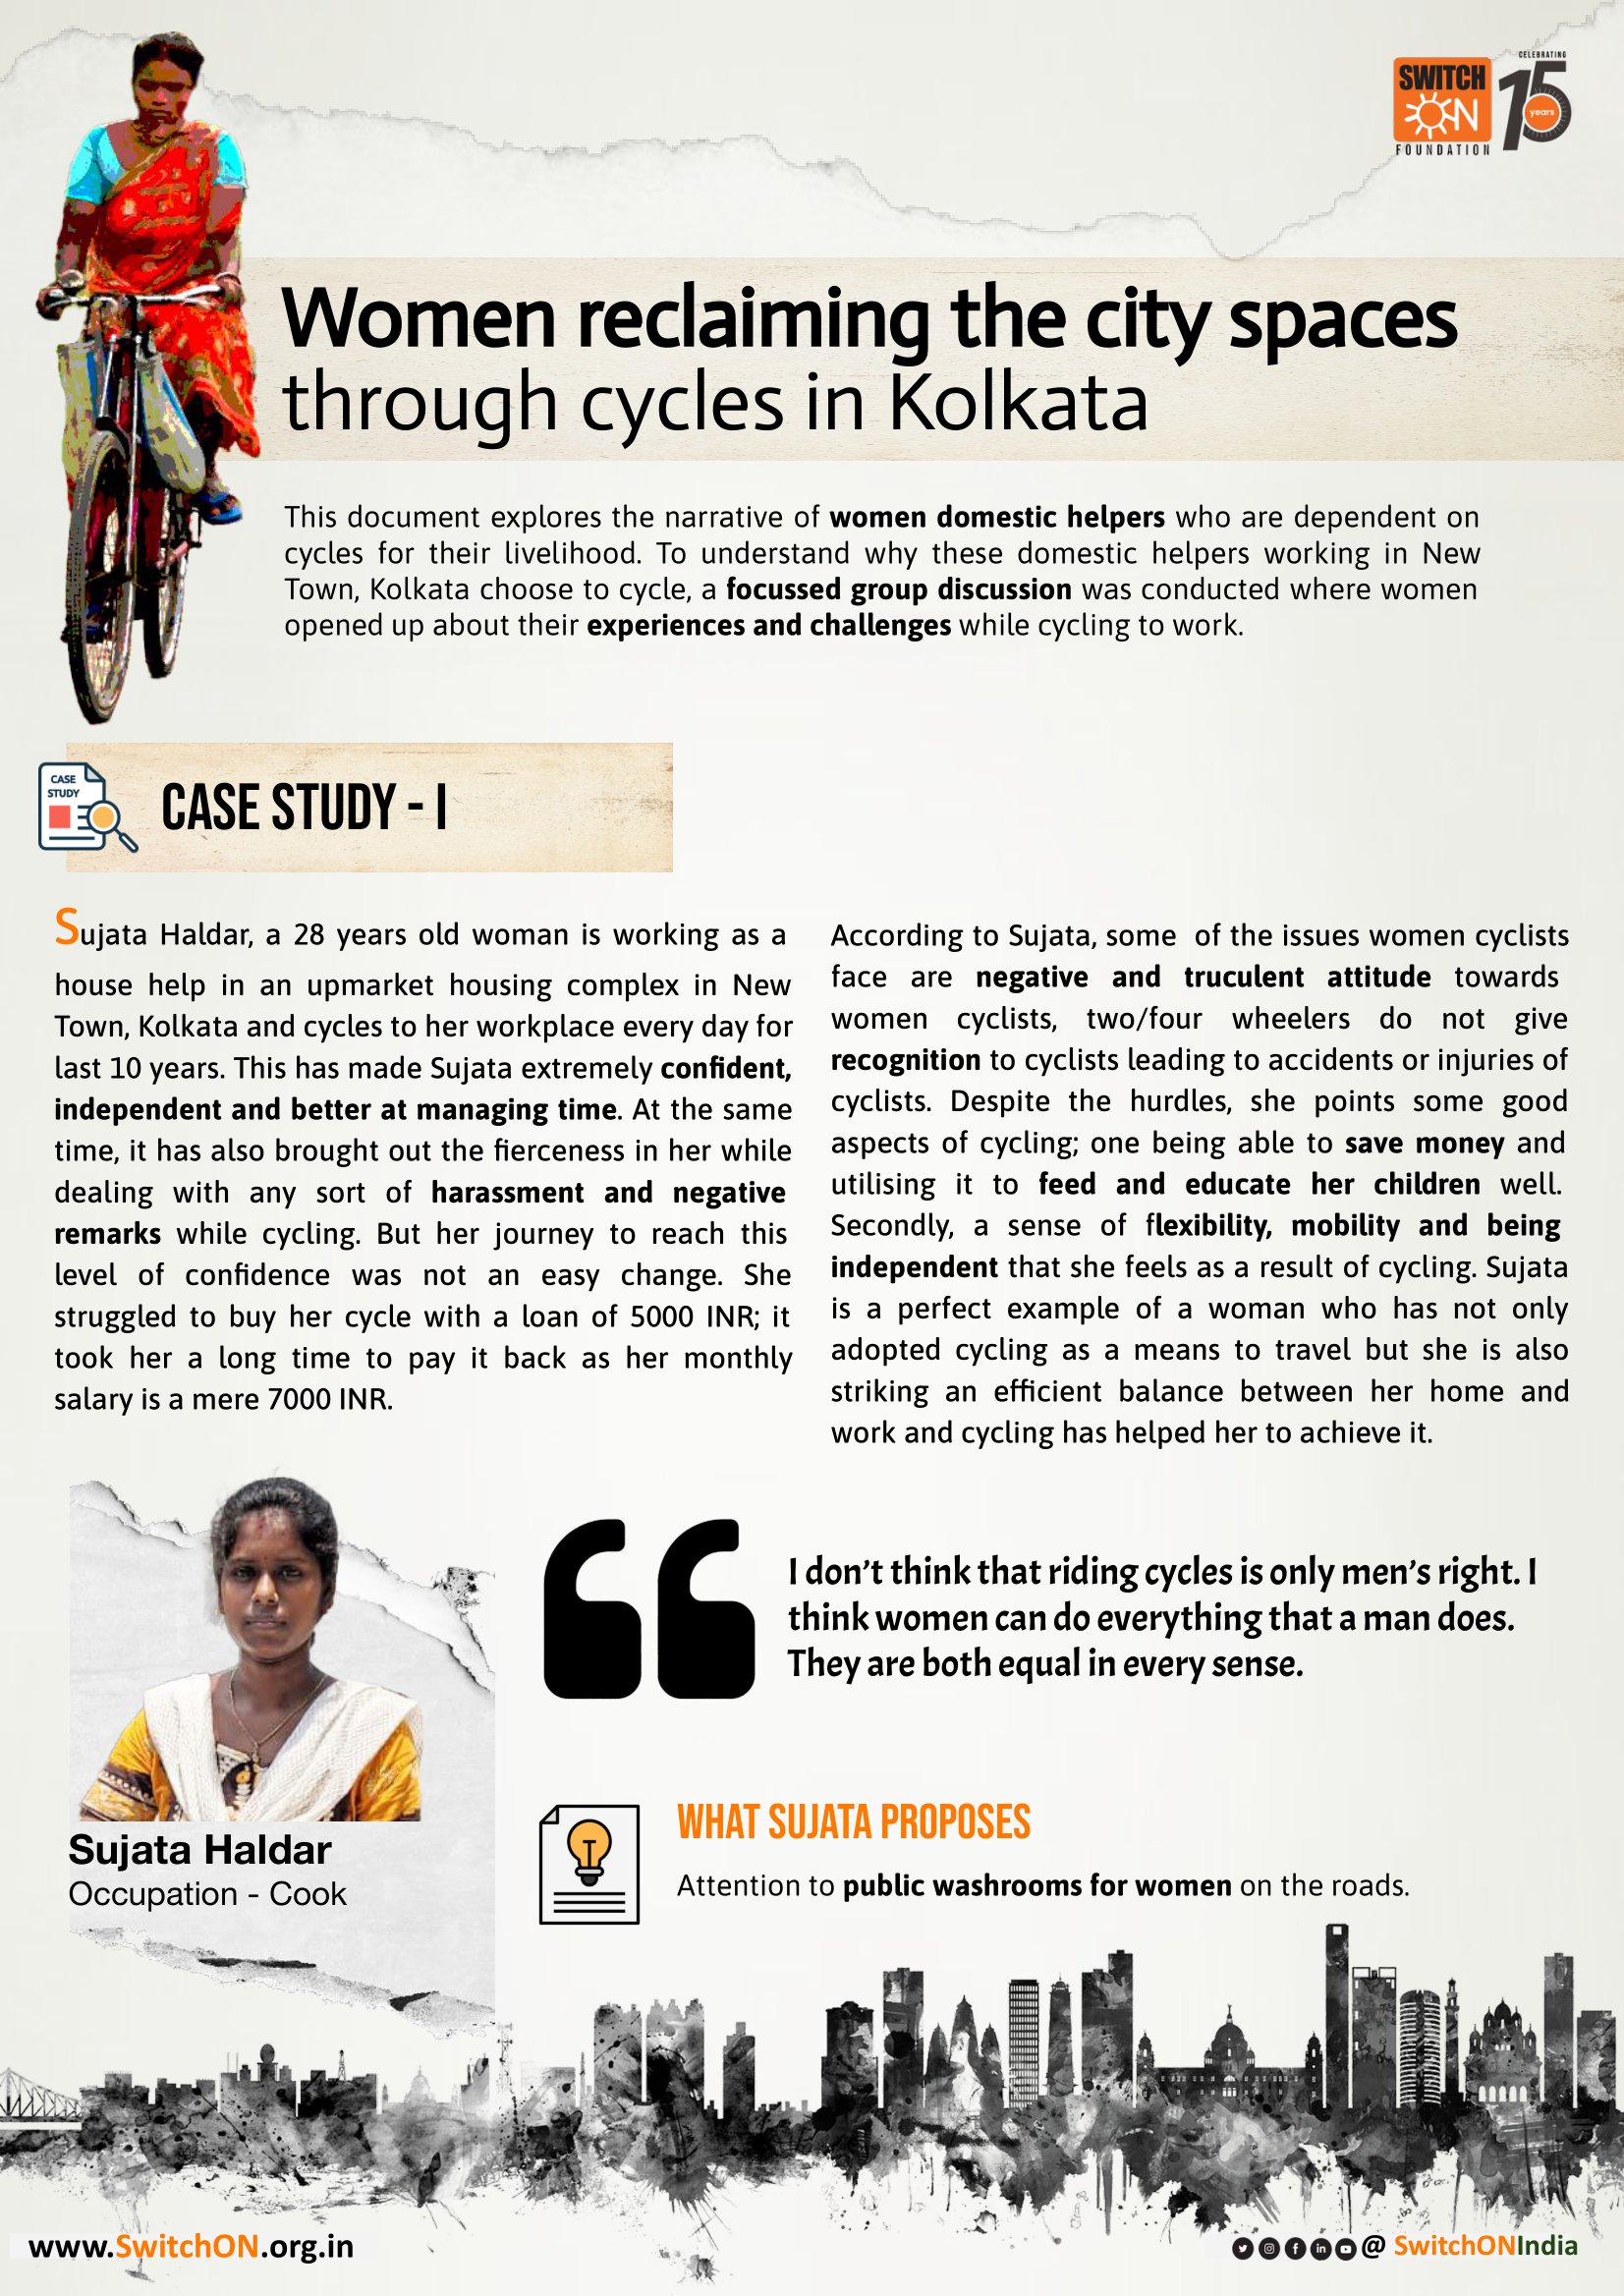 Women reclaiming the city spaces through cycles in Kolkata